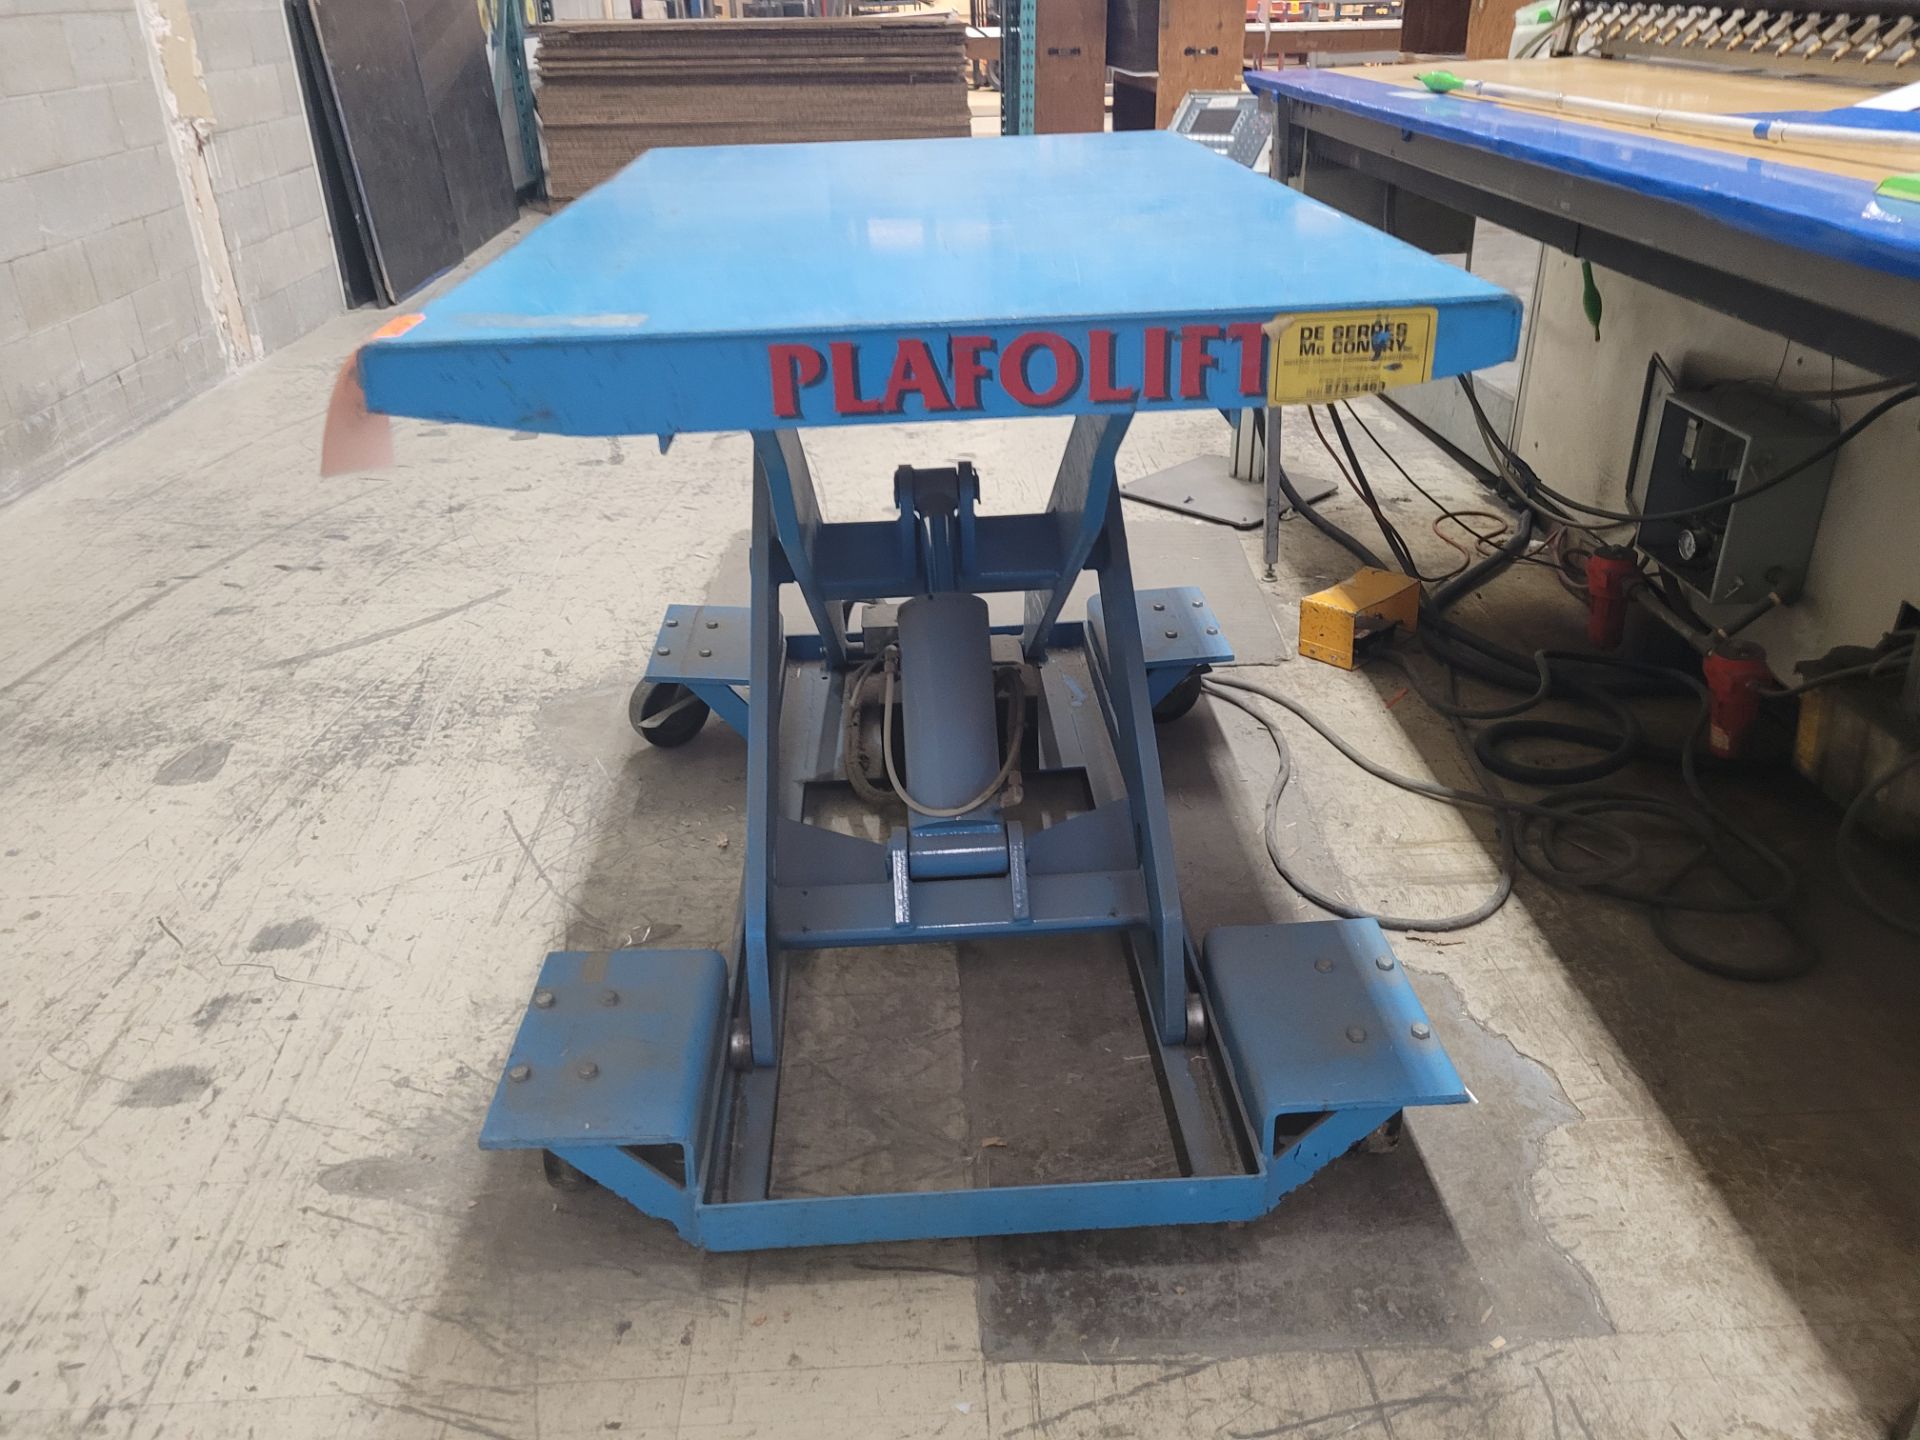 PLAFOLIFT mod. C2900-00019 3000lb cap. Hydraulic Lift Table on casters - Image 5 of 5